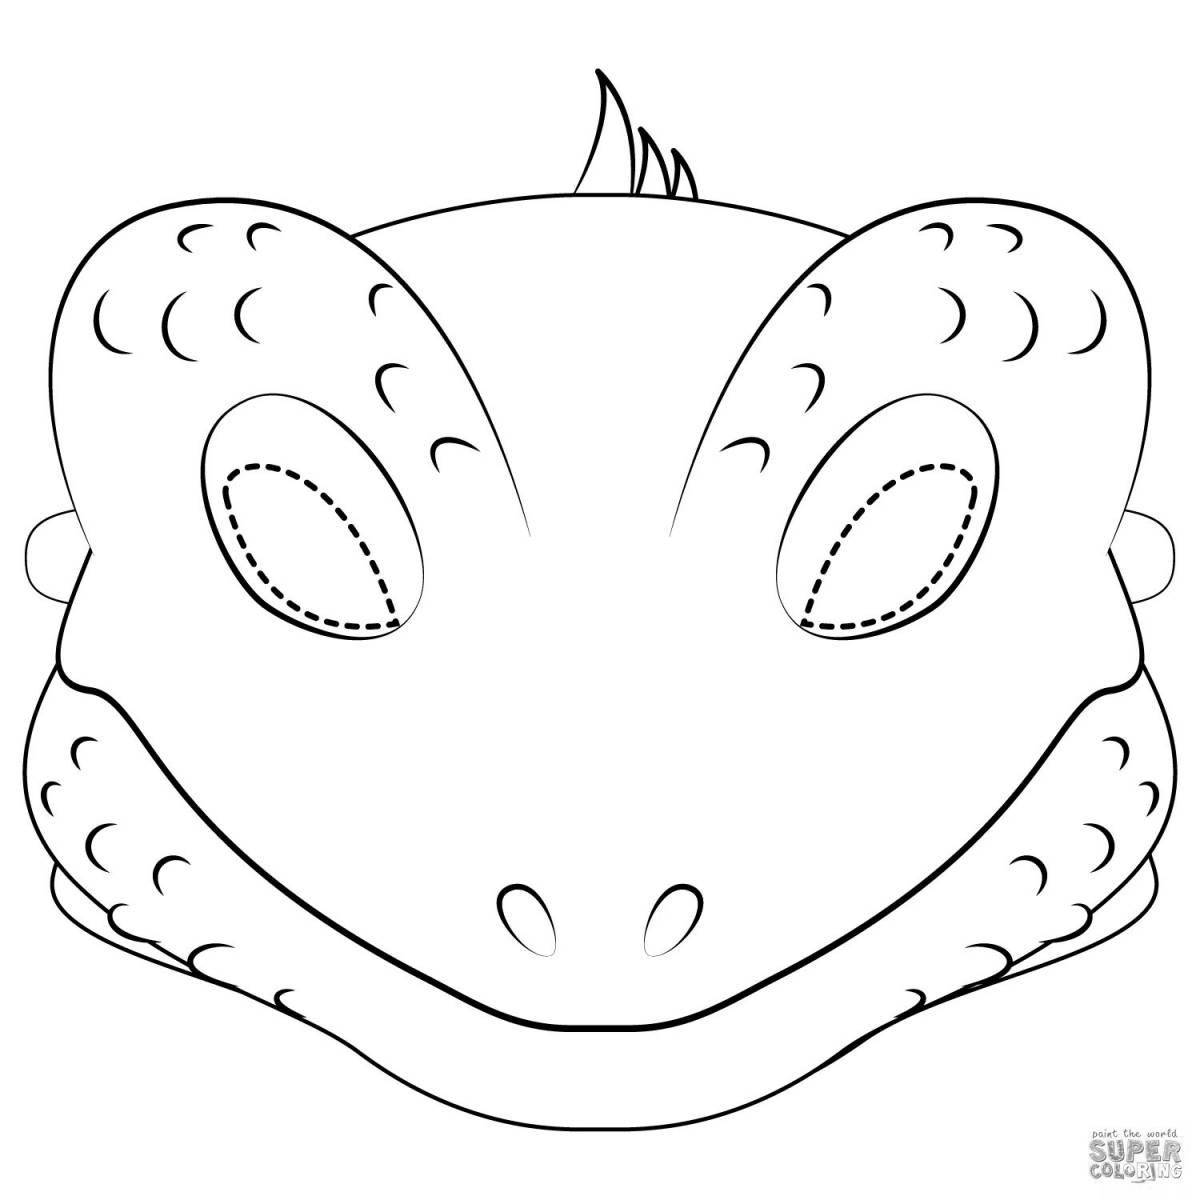 Colorful coloring animal mask for kids